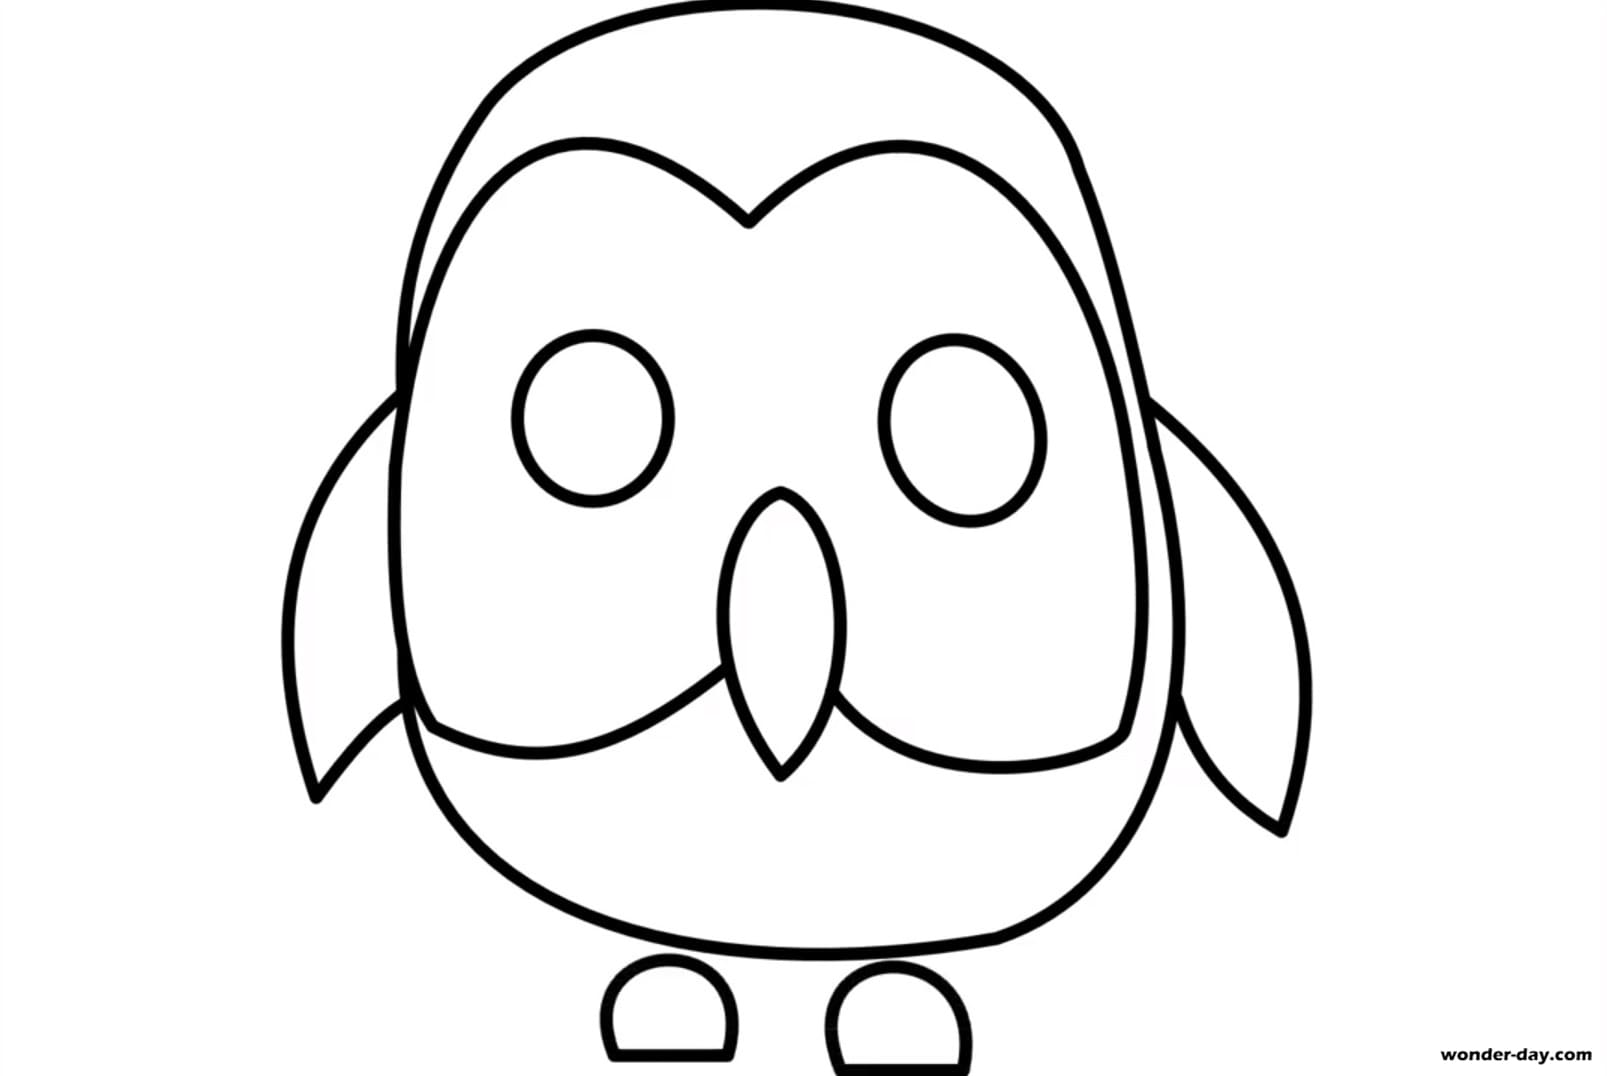 Adopt Me Coloring Pages - Coloring Home